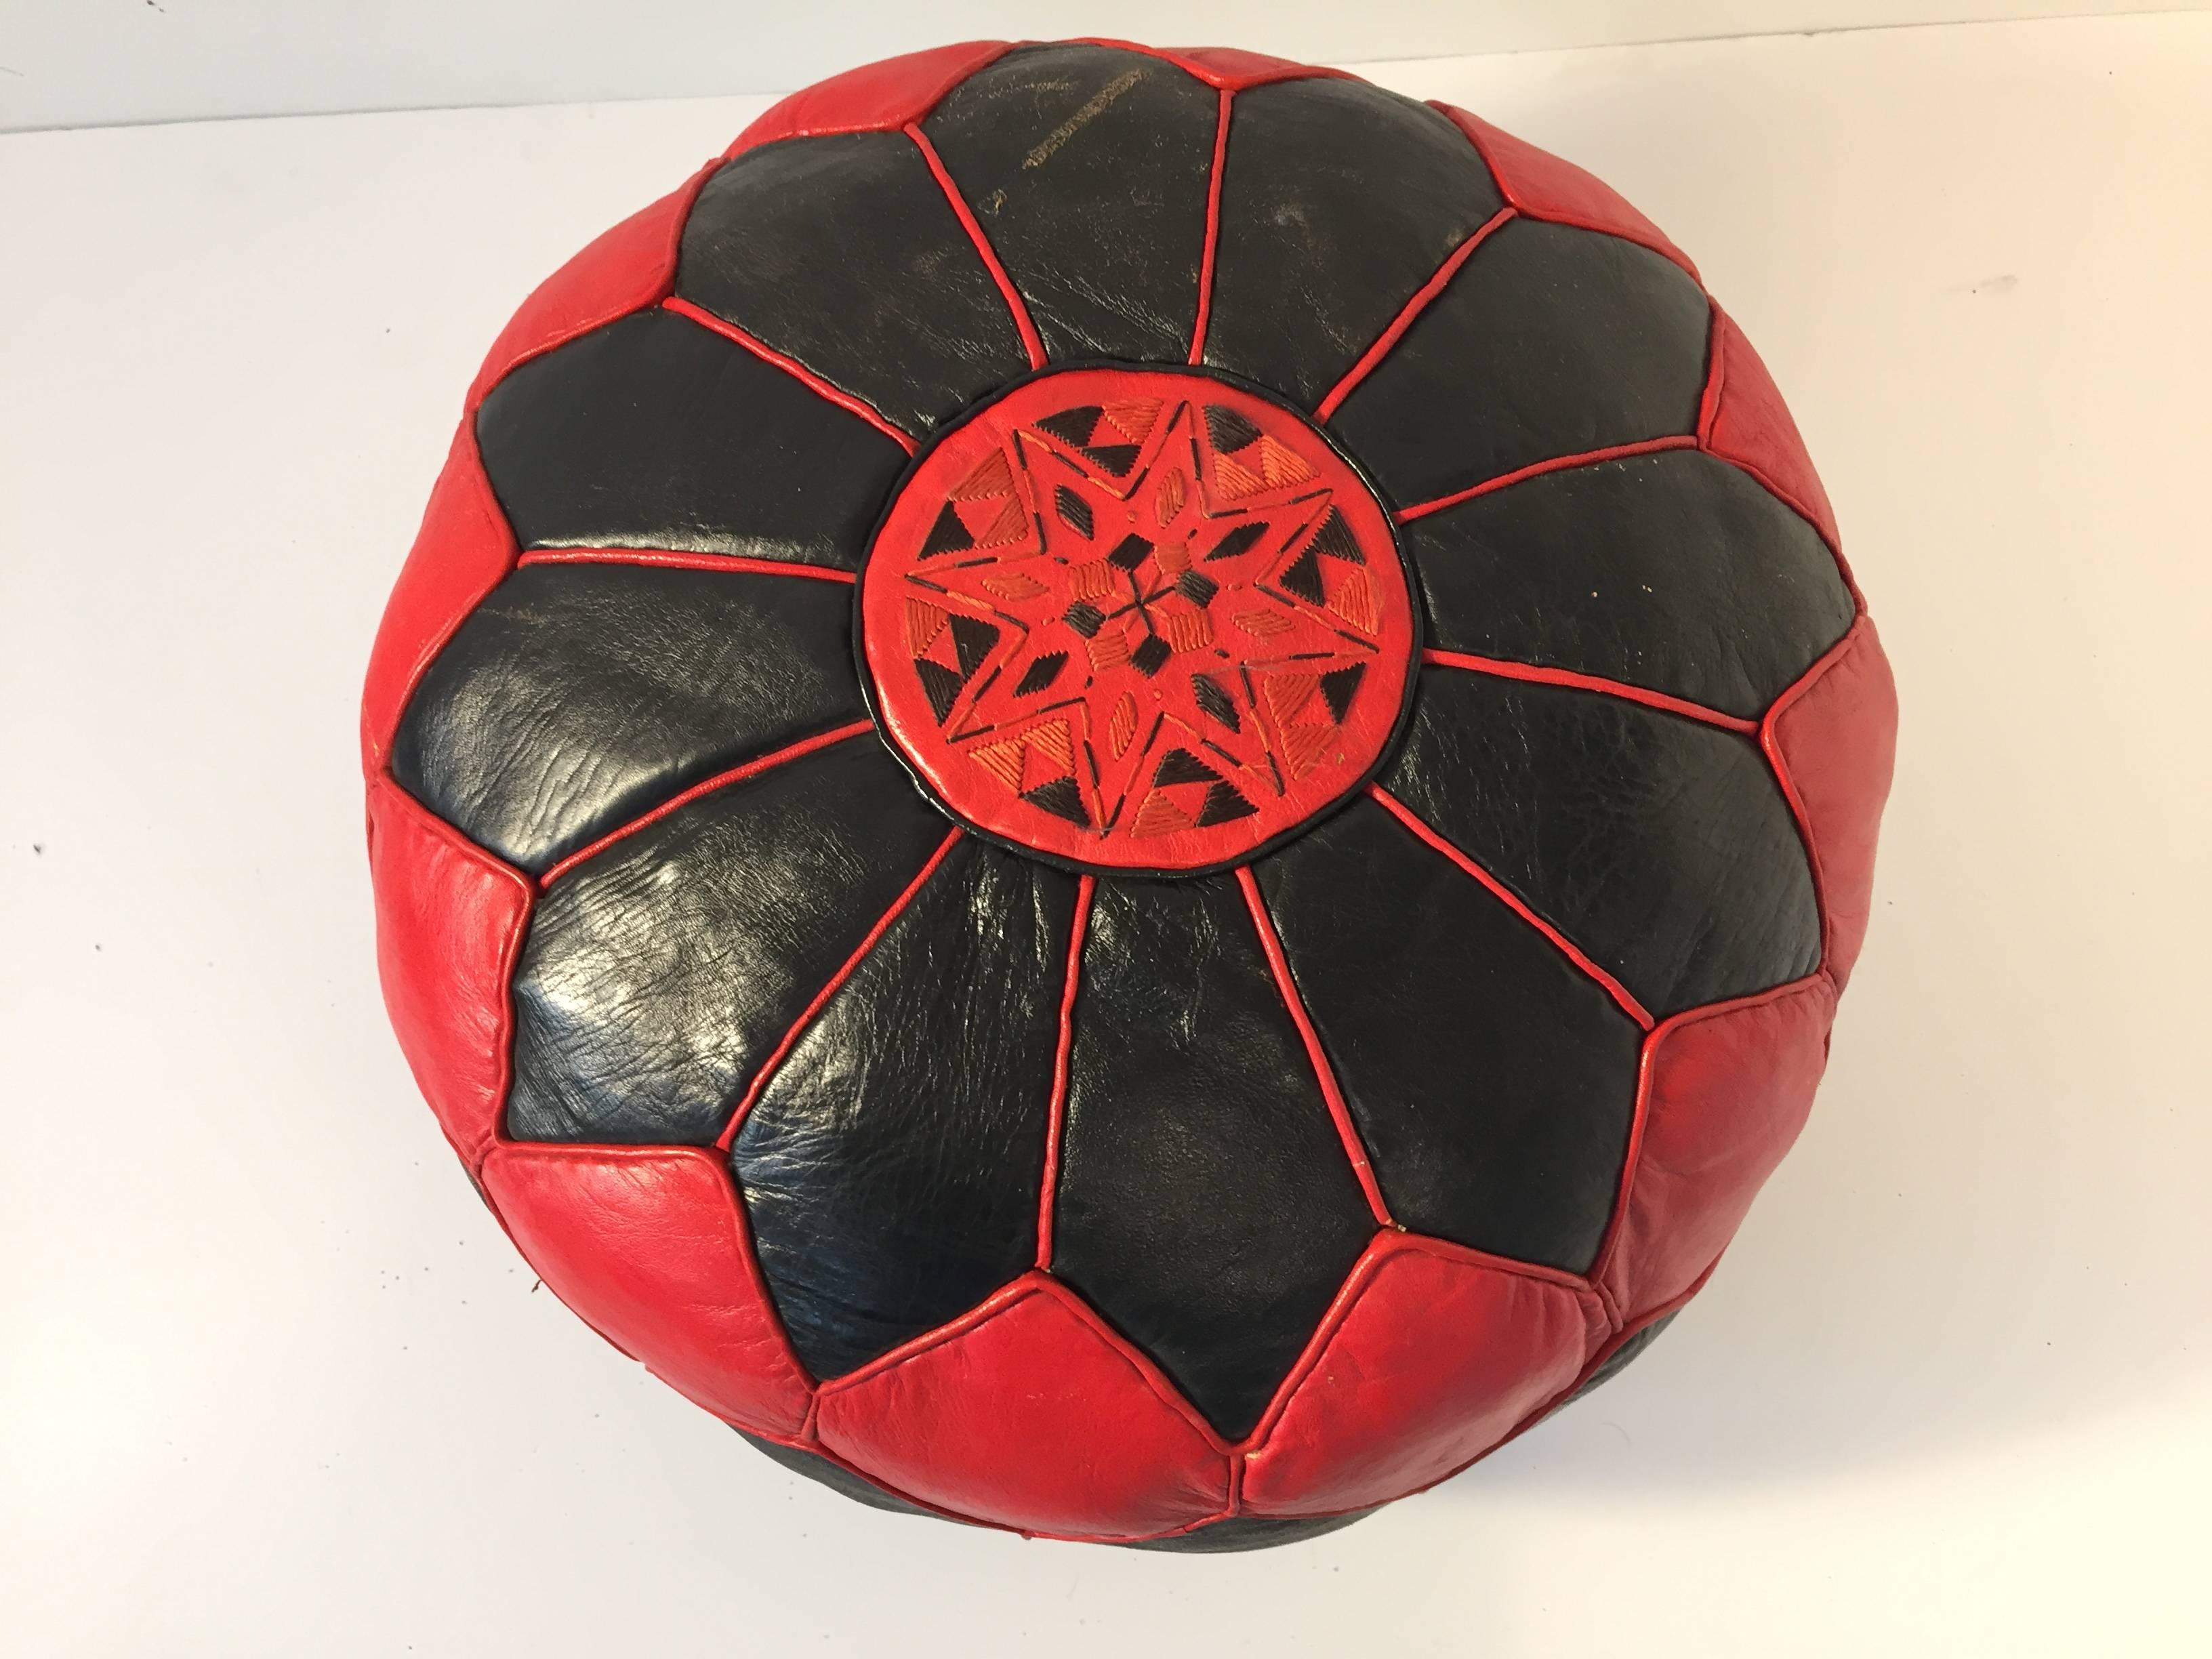 Moroccan red and black colors round leather pouf hand tooled and embroidered in Marrakesh, Morocco. 
Size is 20 in. diameter x 12 in. height.